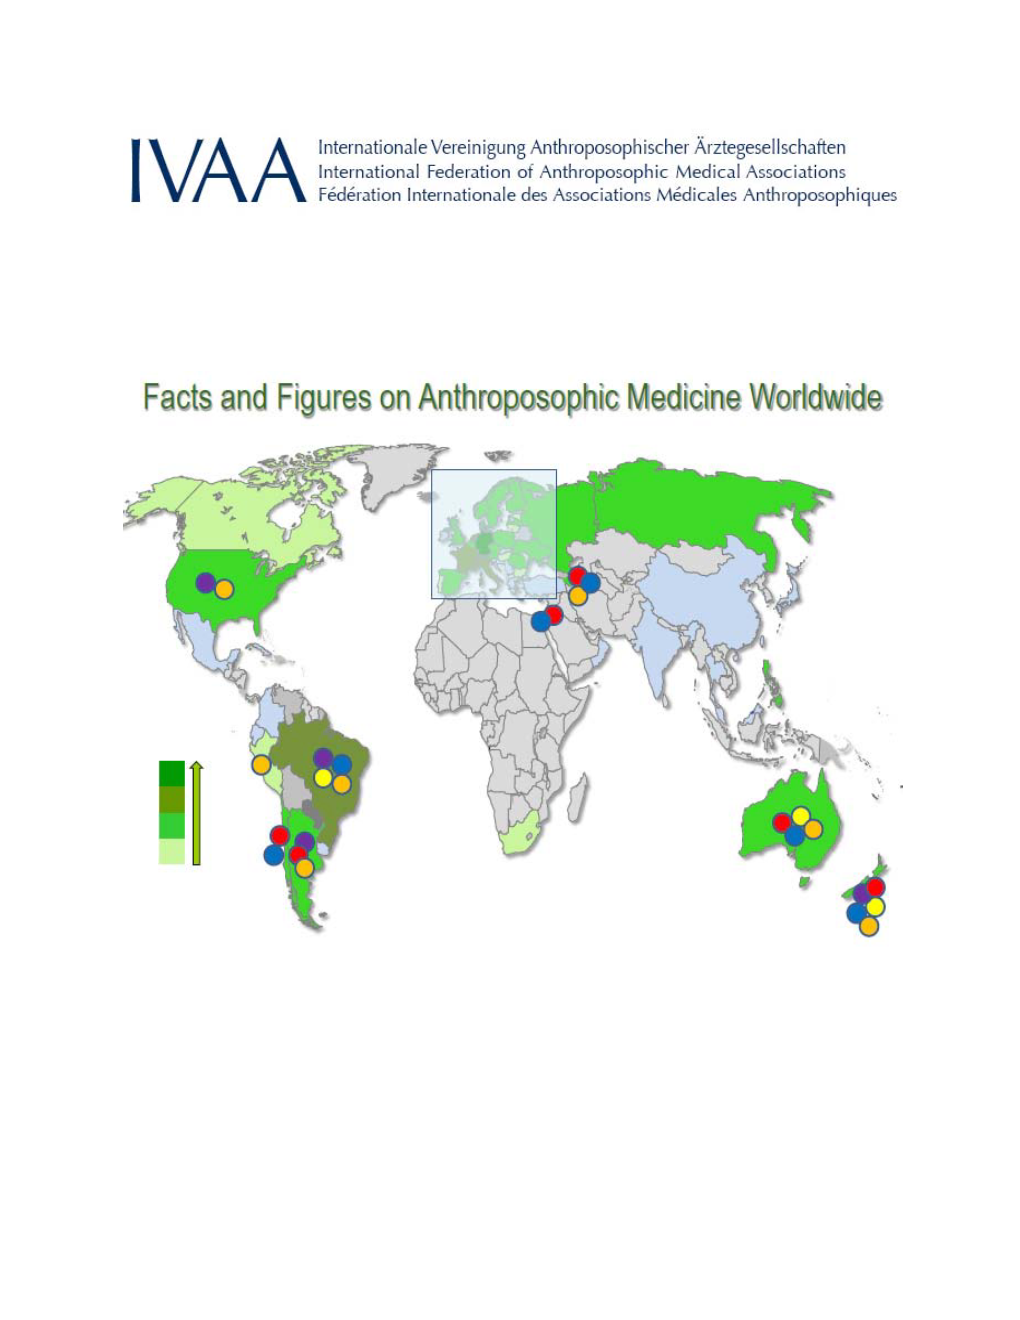 Facts and Figures on Anthroposophic Medicine (AM) Worldwide July 2012